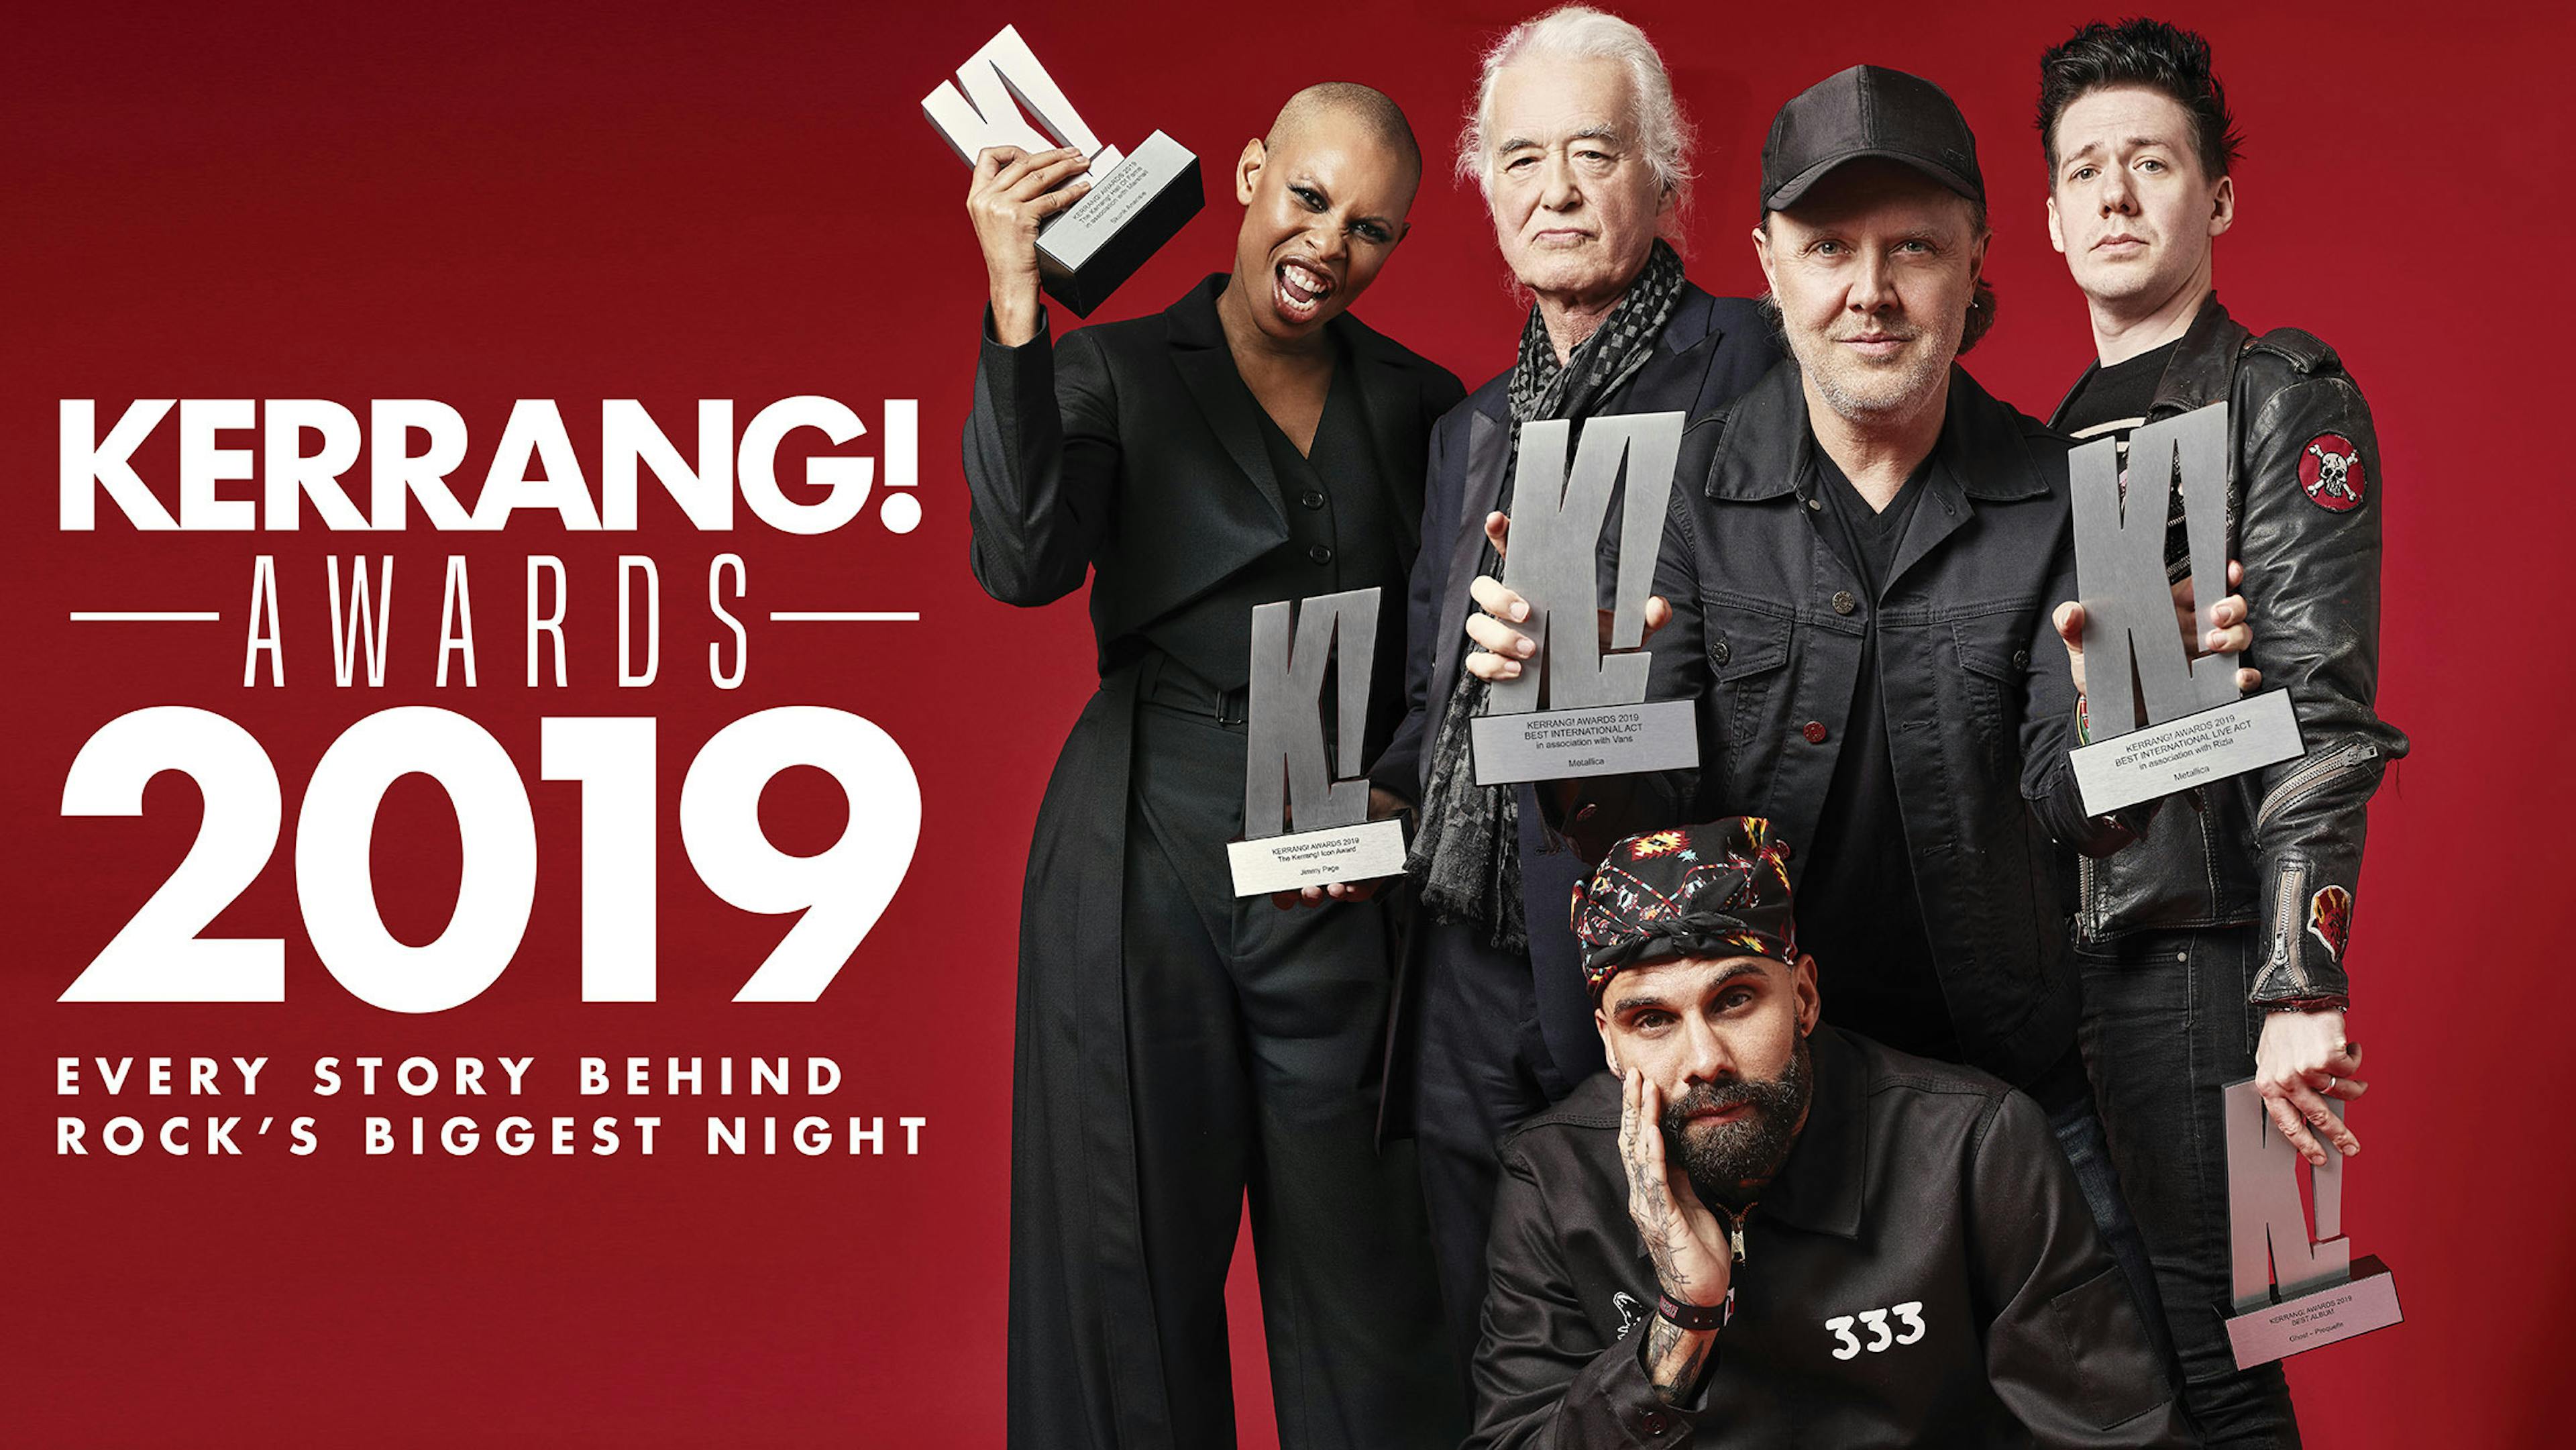 The Kerrang! Awards 2019: Every Story Behind Rock's Biggest Night